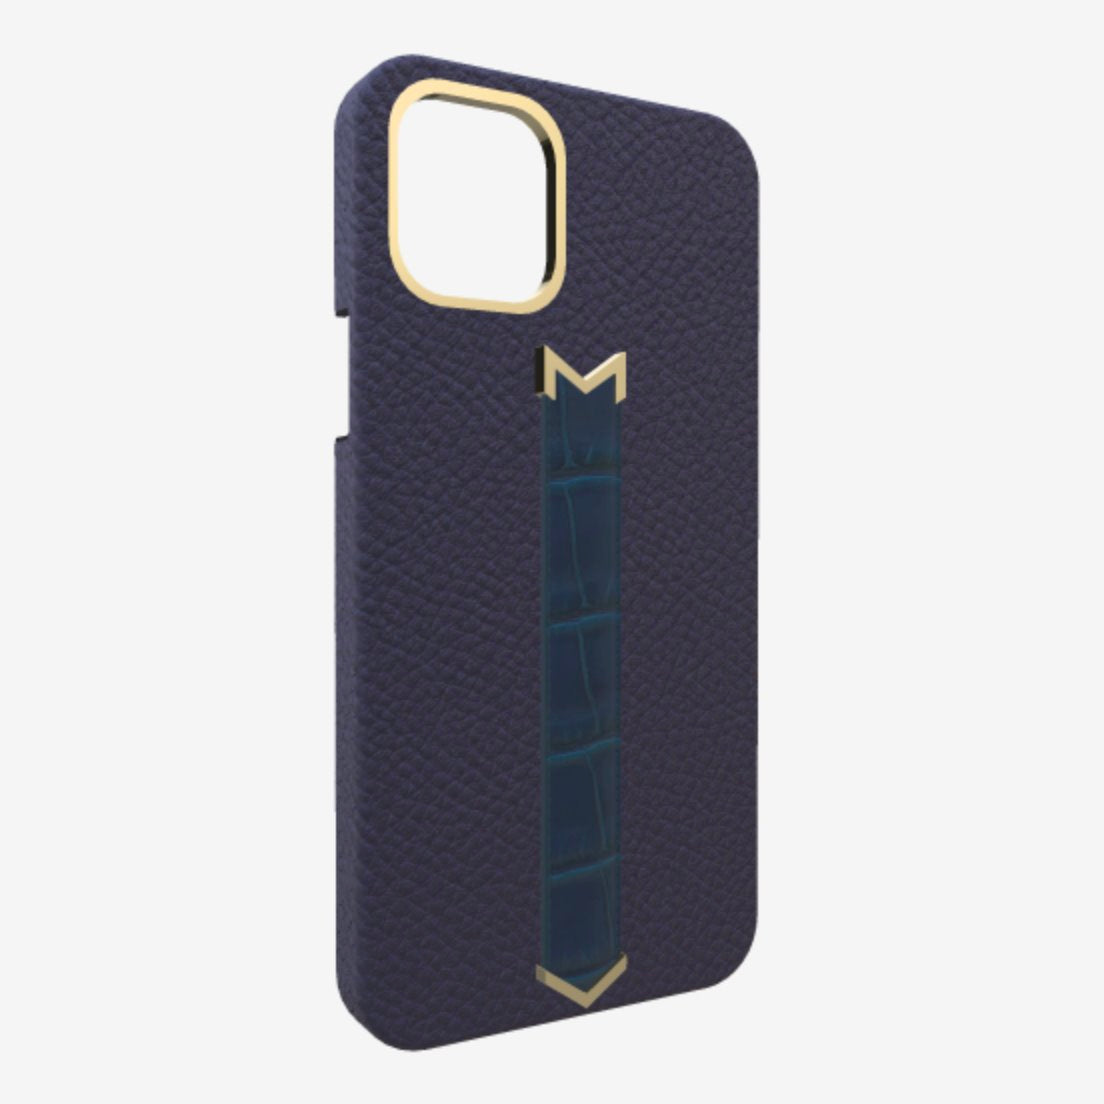 Gold Finger Strap Case for iPhone 13 Pro in Genuine Calfskin and Alligator Navy Blue Night Blue 